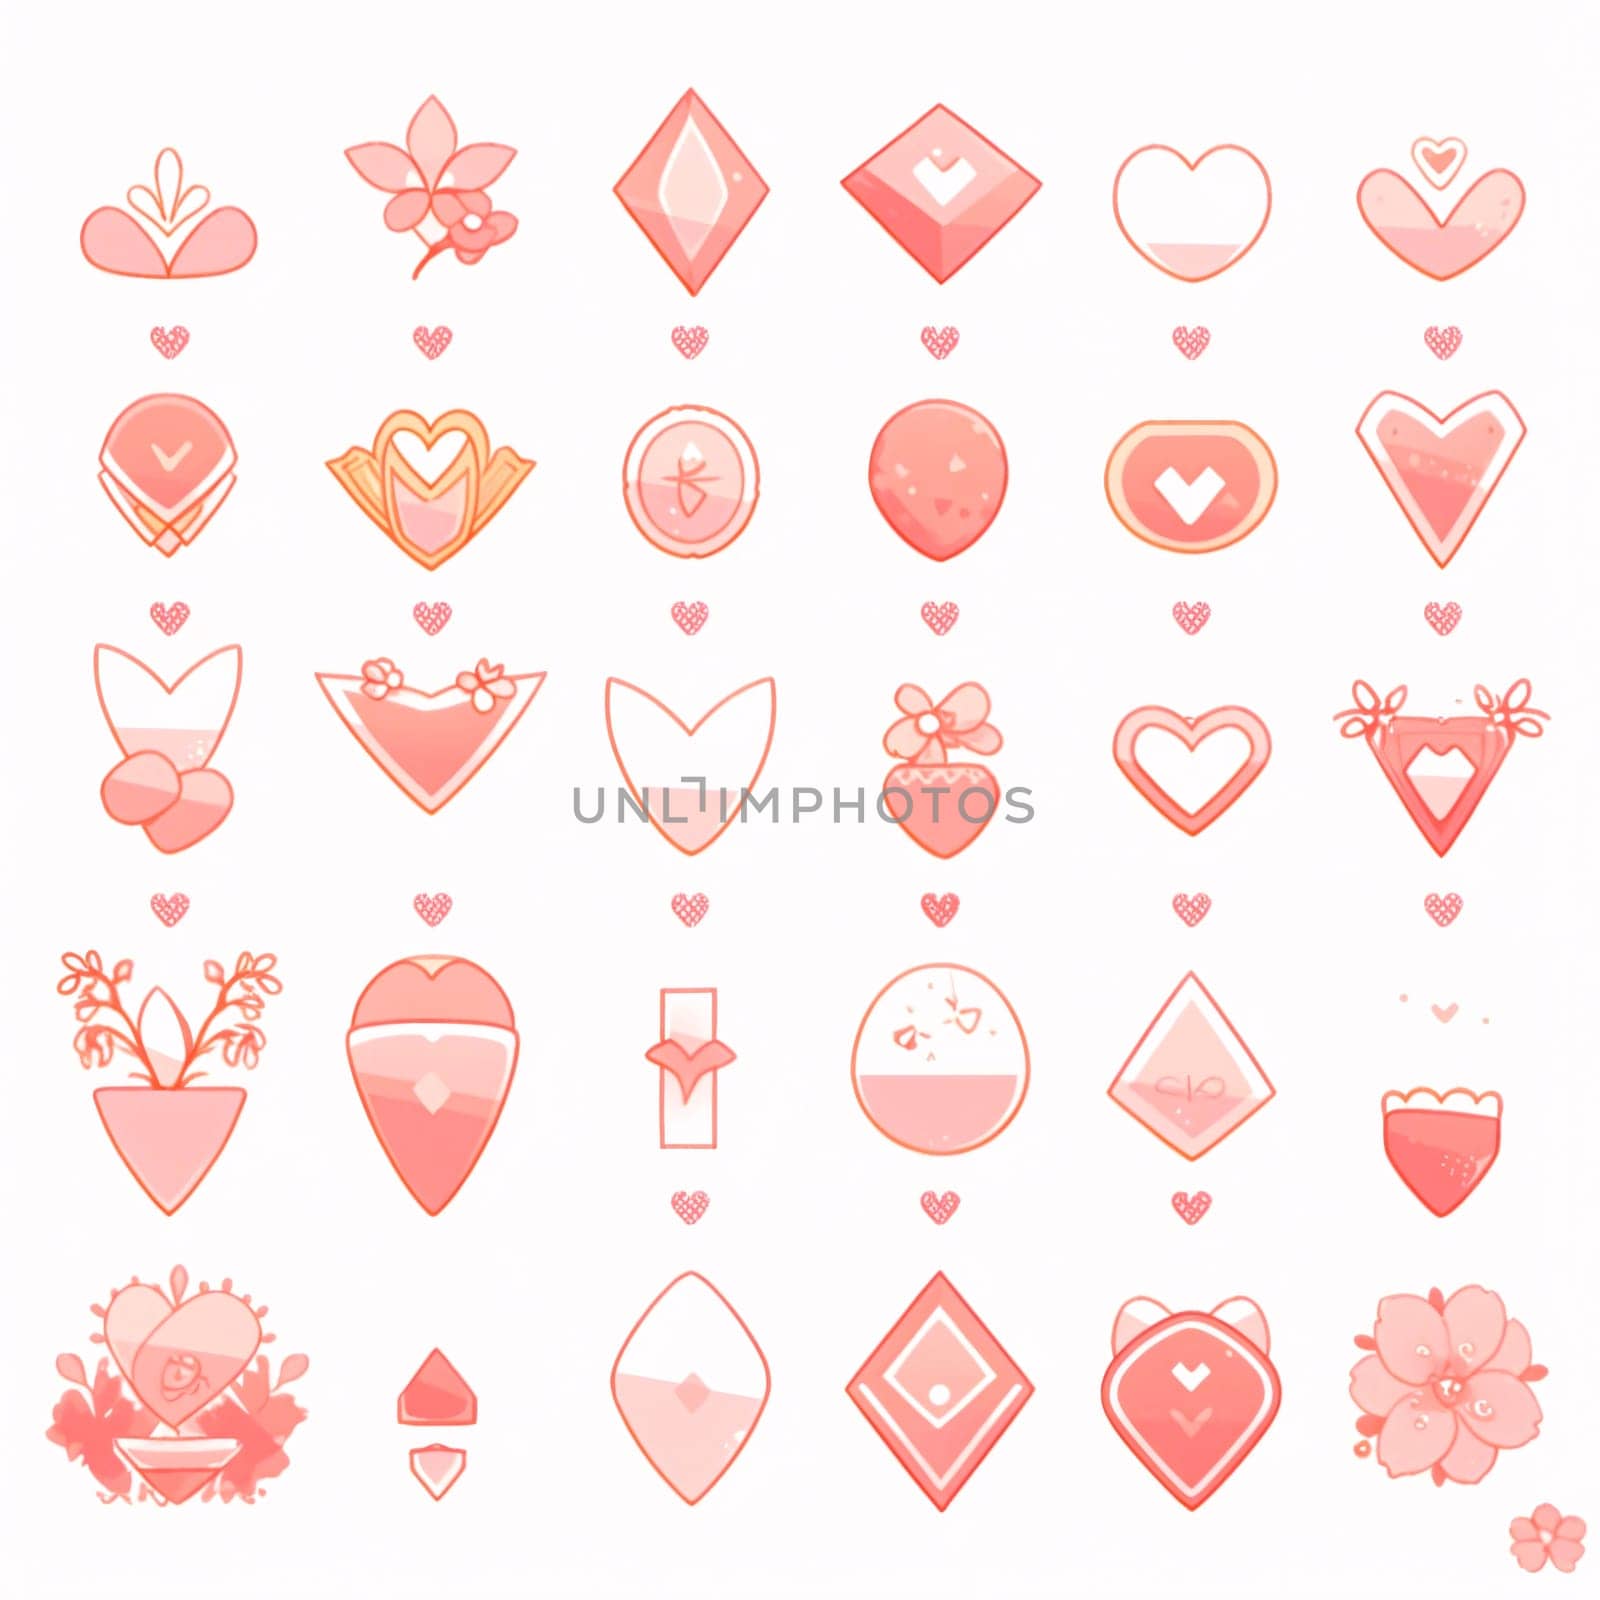 New icons collection: Vector set of pink heart icons and symbols for Valentines day.